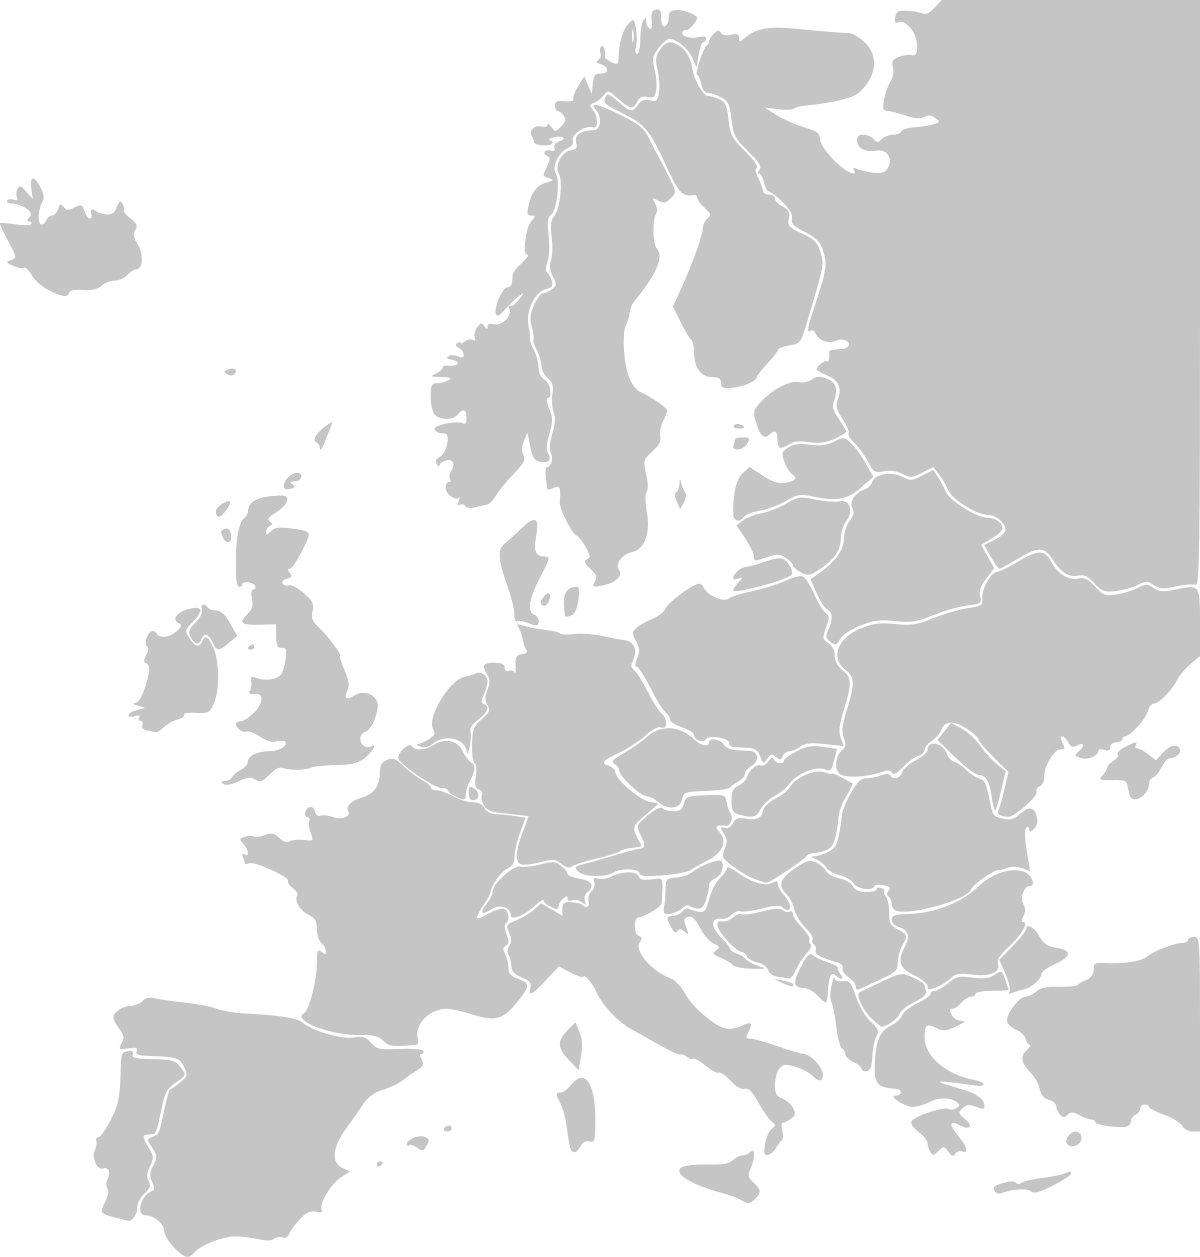 file-blankmap-europe-svg-wikimedia-commons